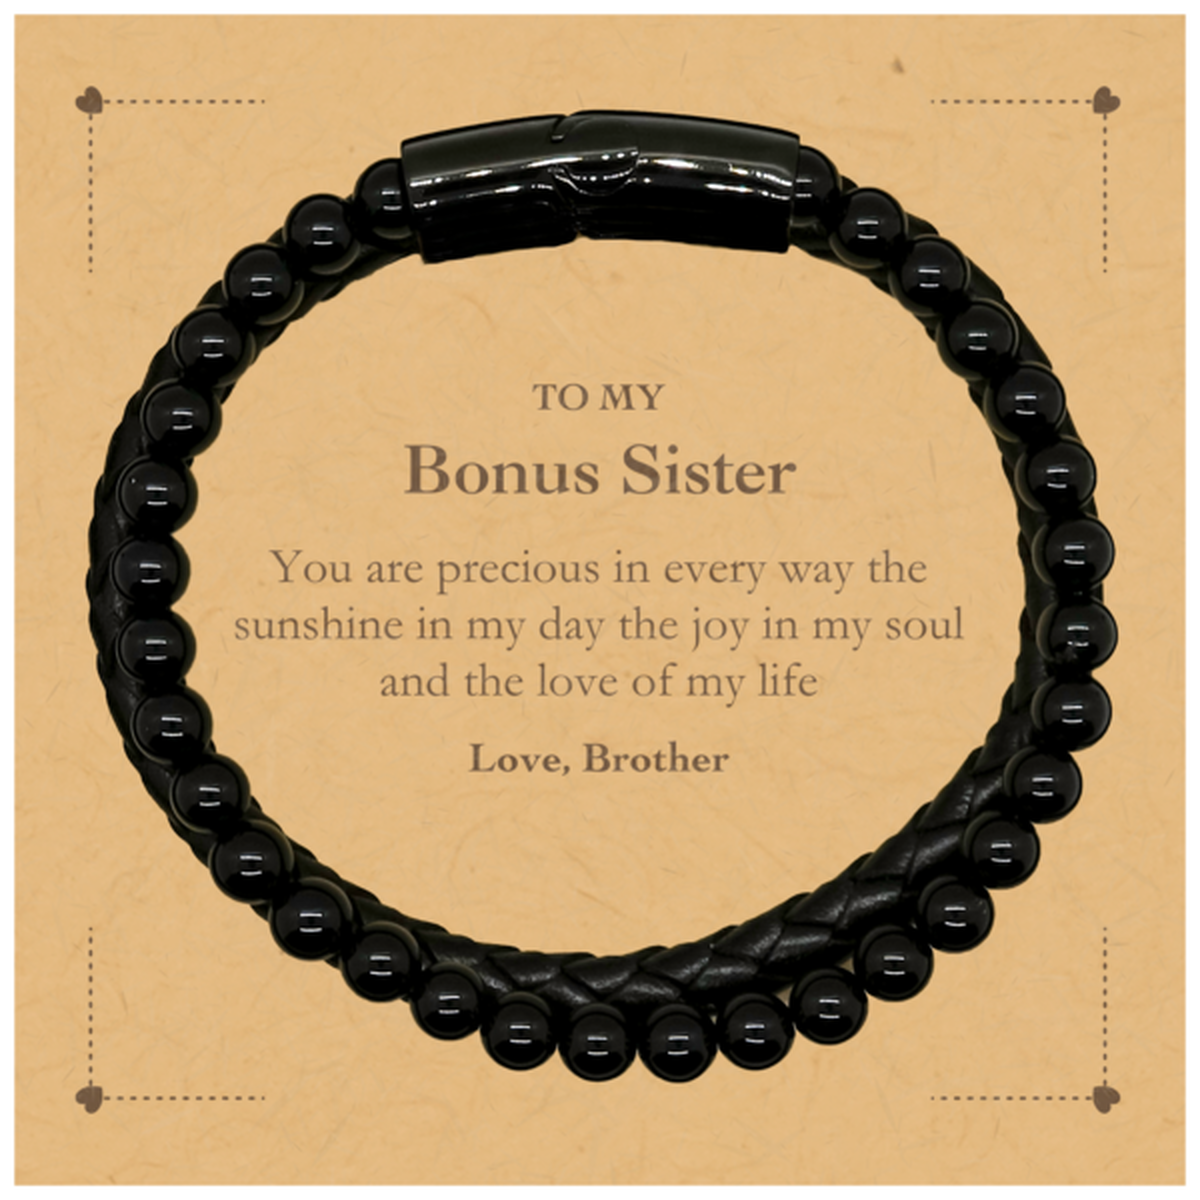 Graduation Gifts for Bonus Sister Stone Leather Bracelets Present from Brother, Christmas Bonus Sister Birthday Gifts Bonus Sister You are precious in every way the sunshine in my day. Love, Brother